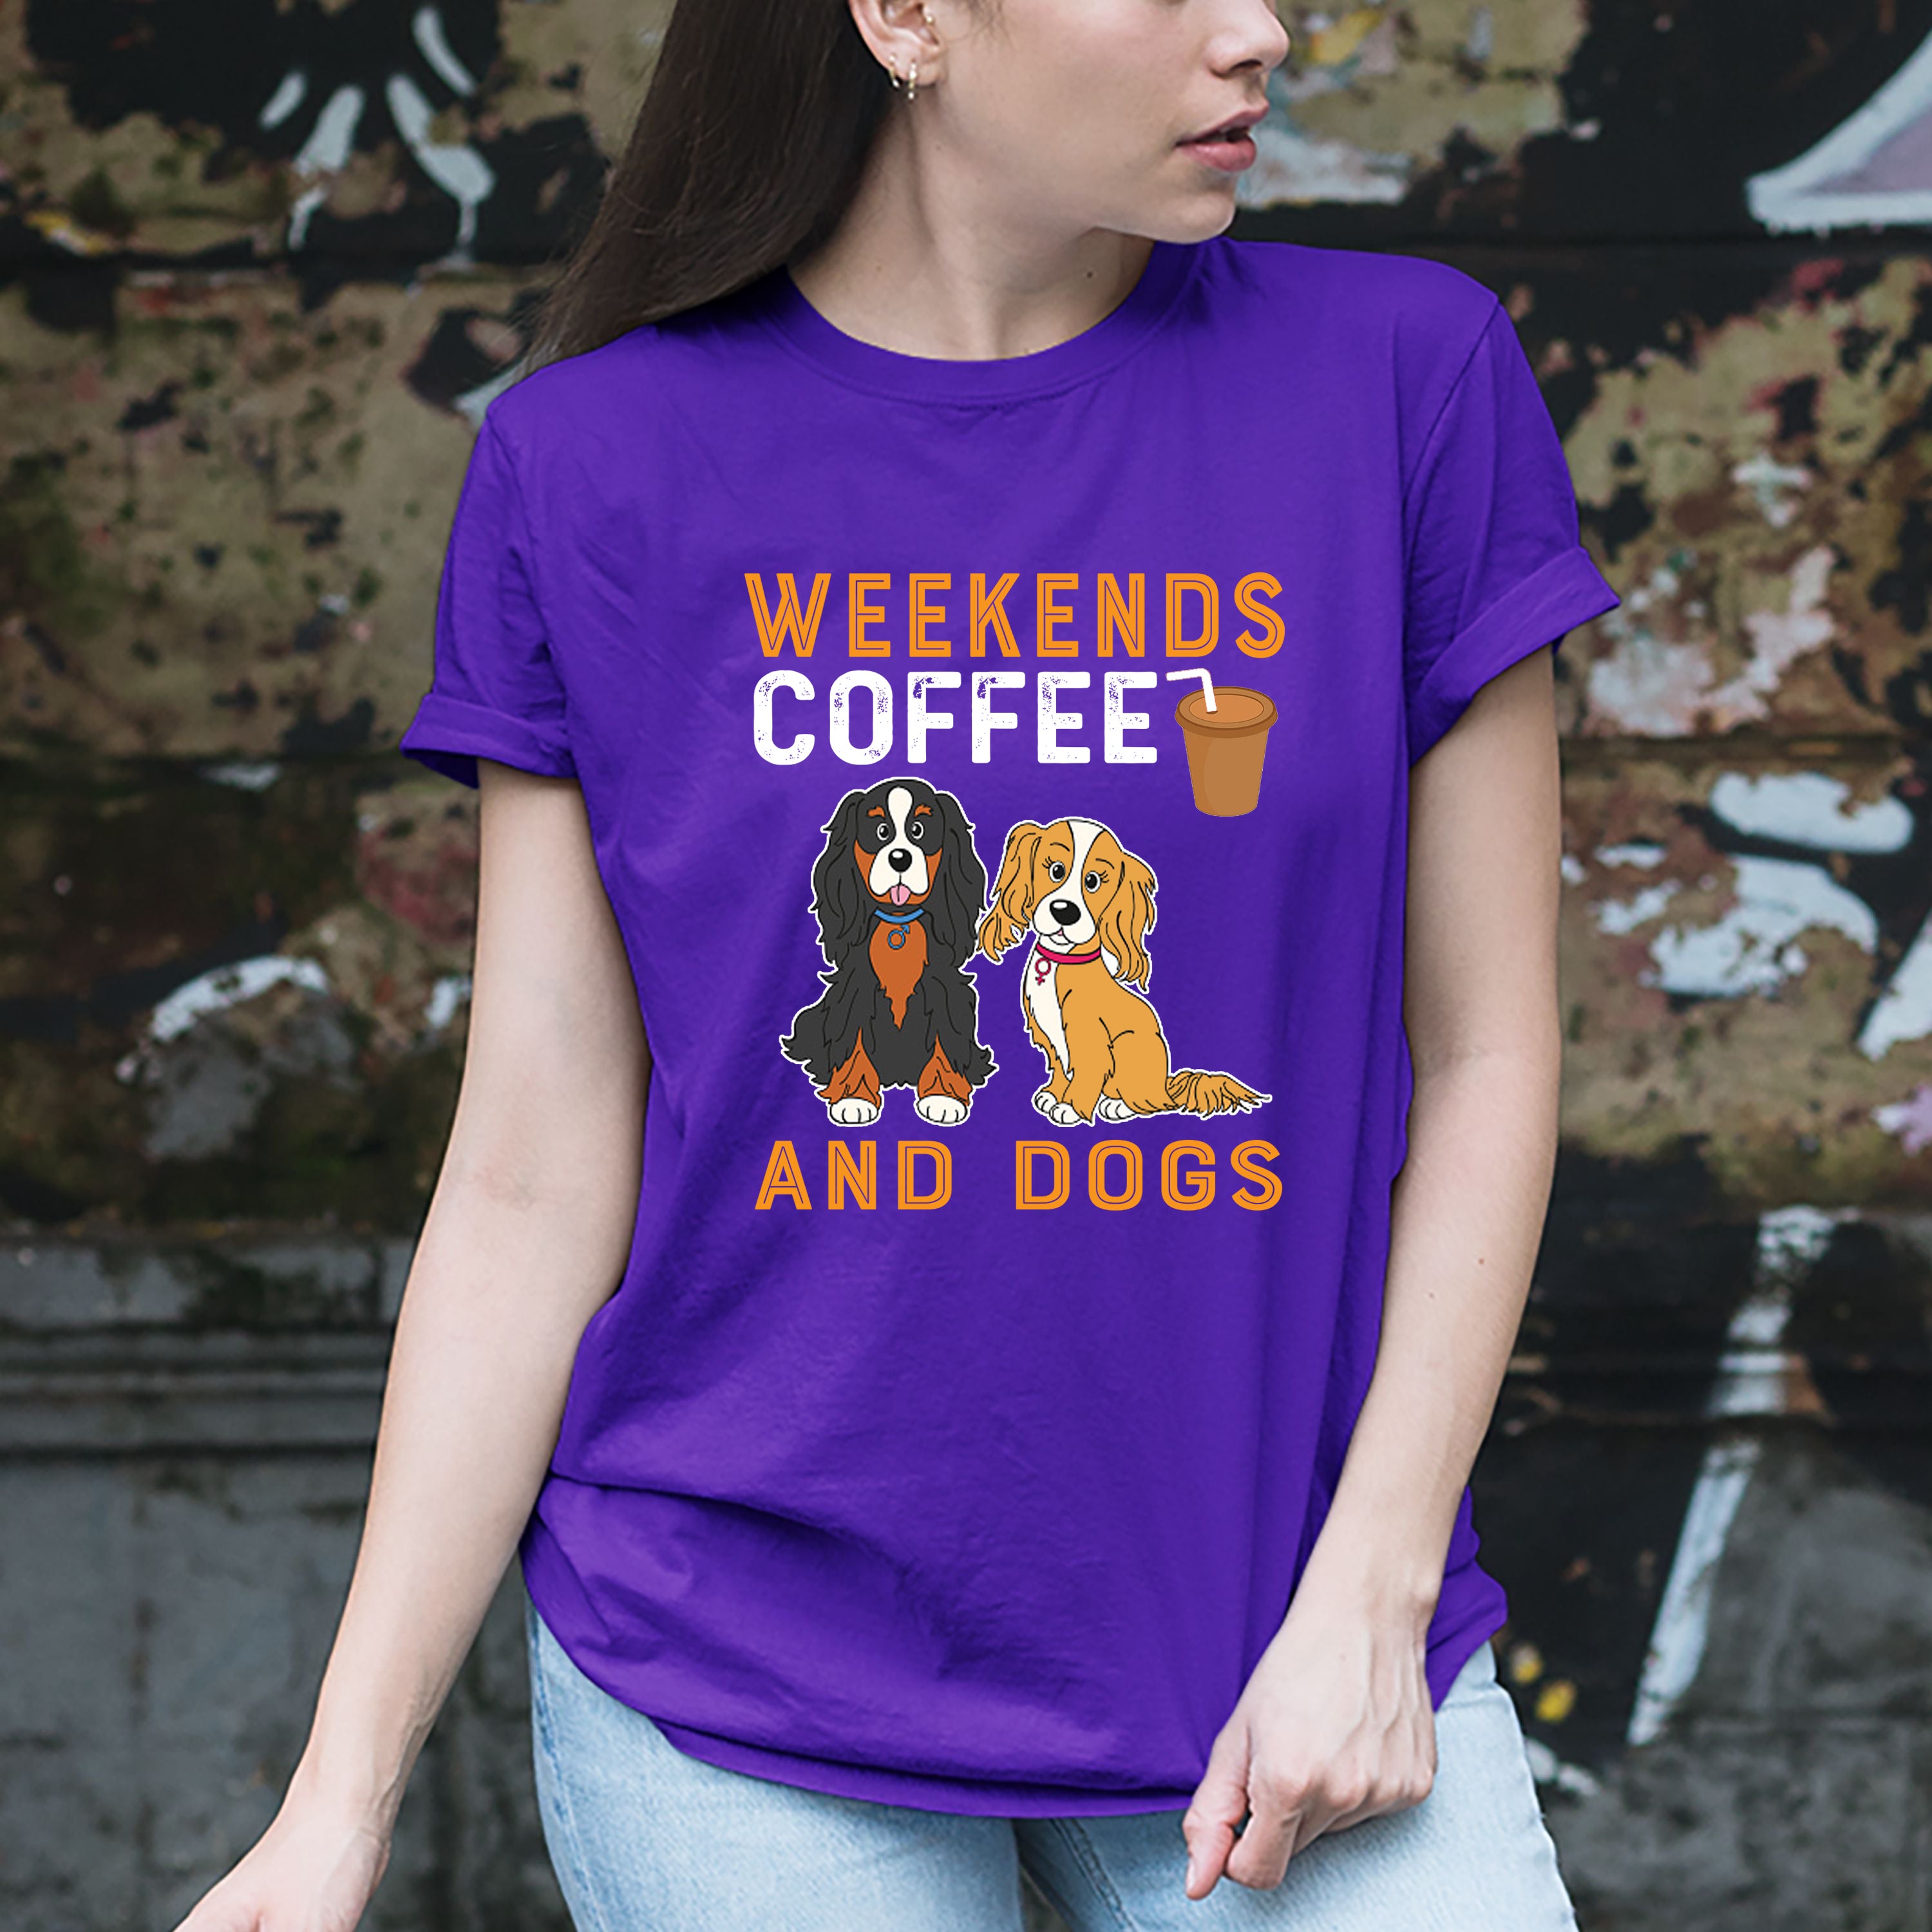 'WEEKENDS COFFEE AND DOGS''